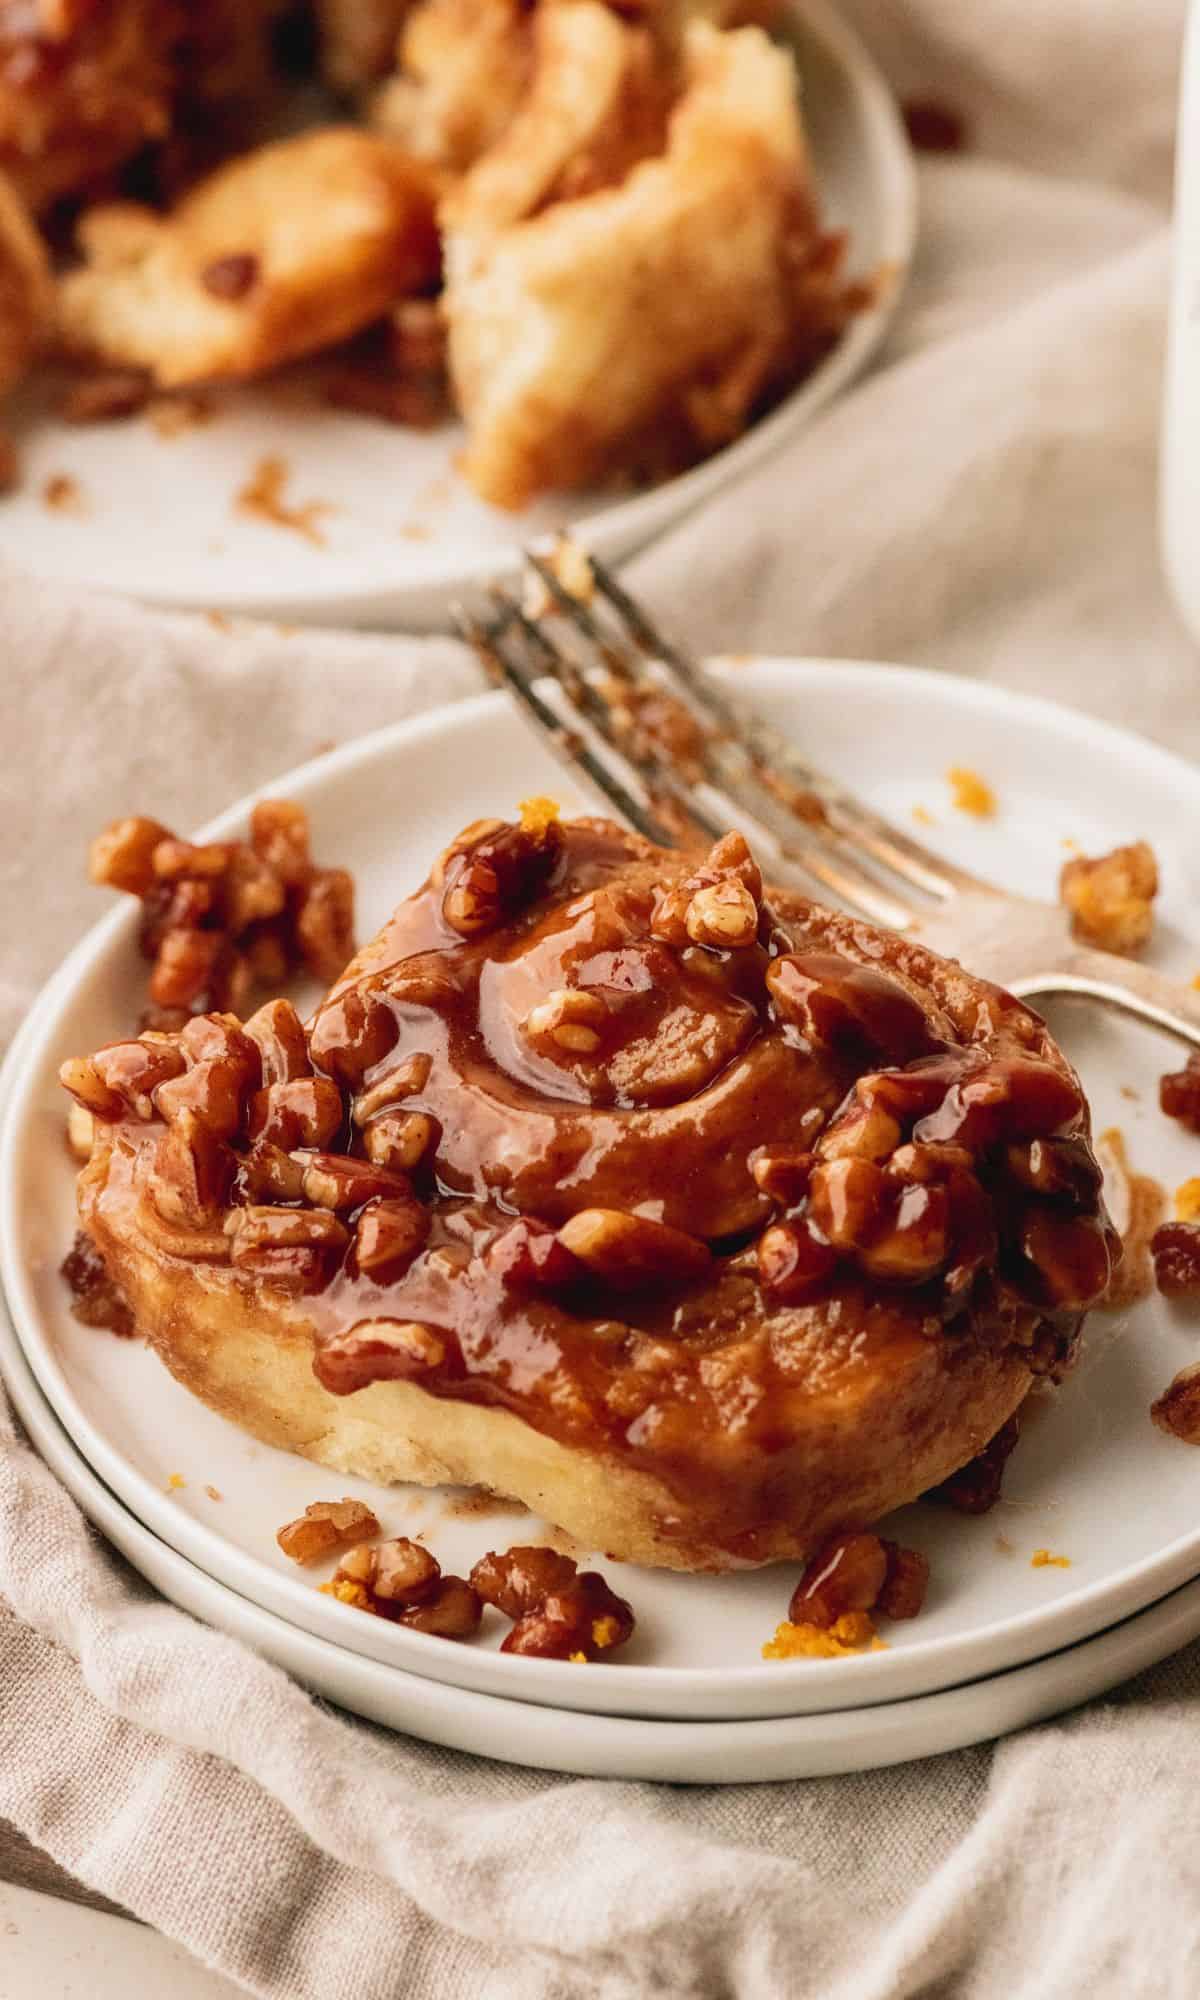 A caramel pecan sticky bun on a white plate with a fork.